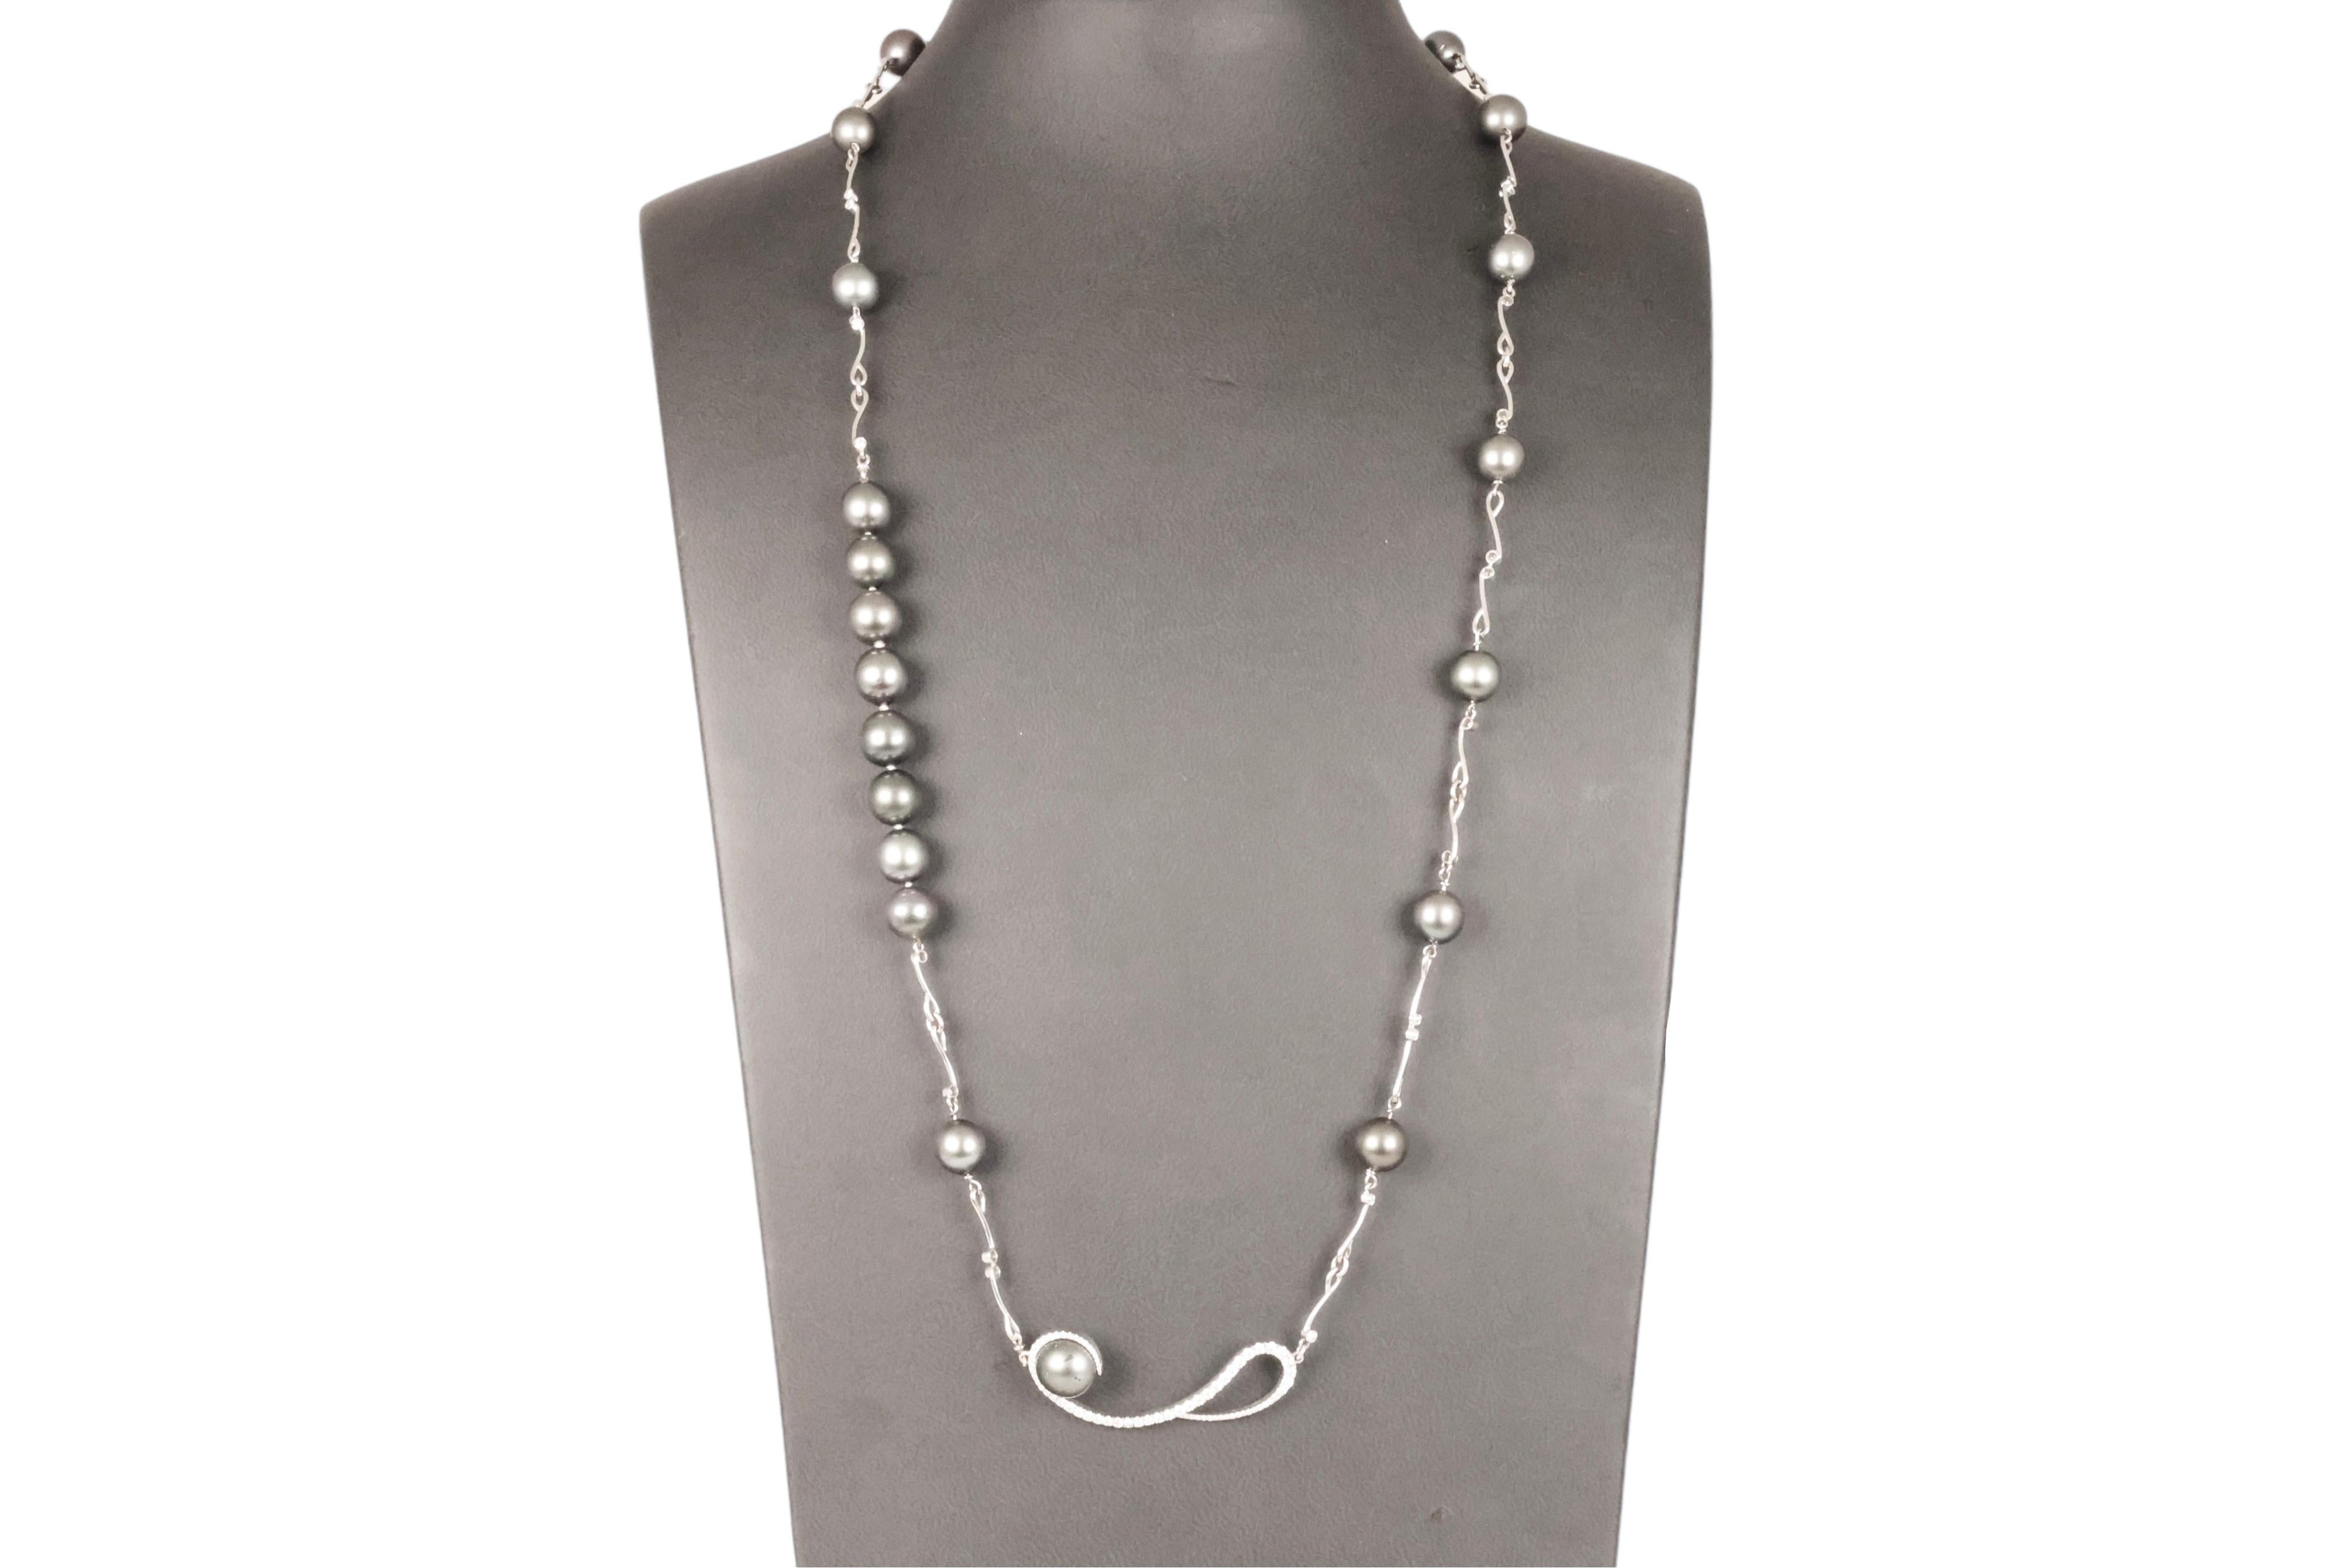 Gorgeous 18kt White Gold Tahitian Pearl Necklace with 2.24 ct Brilliant cut Diamonds 

Pearls: 21 Dark grey Tahitian pearls diameter 10.5 mm, 1 big pearl diameter 12.5 mm

Diamonds: Brilliant cut diamonds together approx. 2.24 ct.

Material: 18 kt.